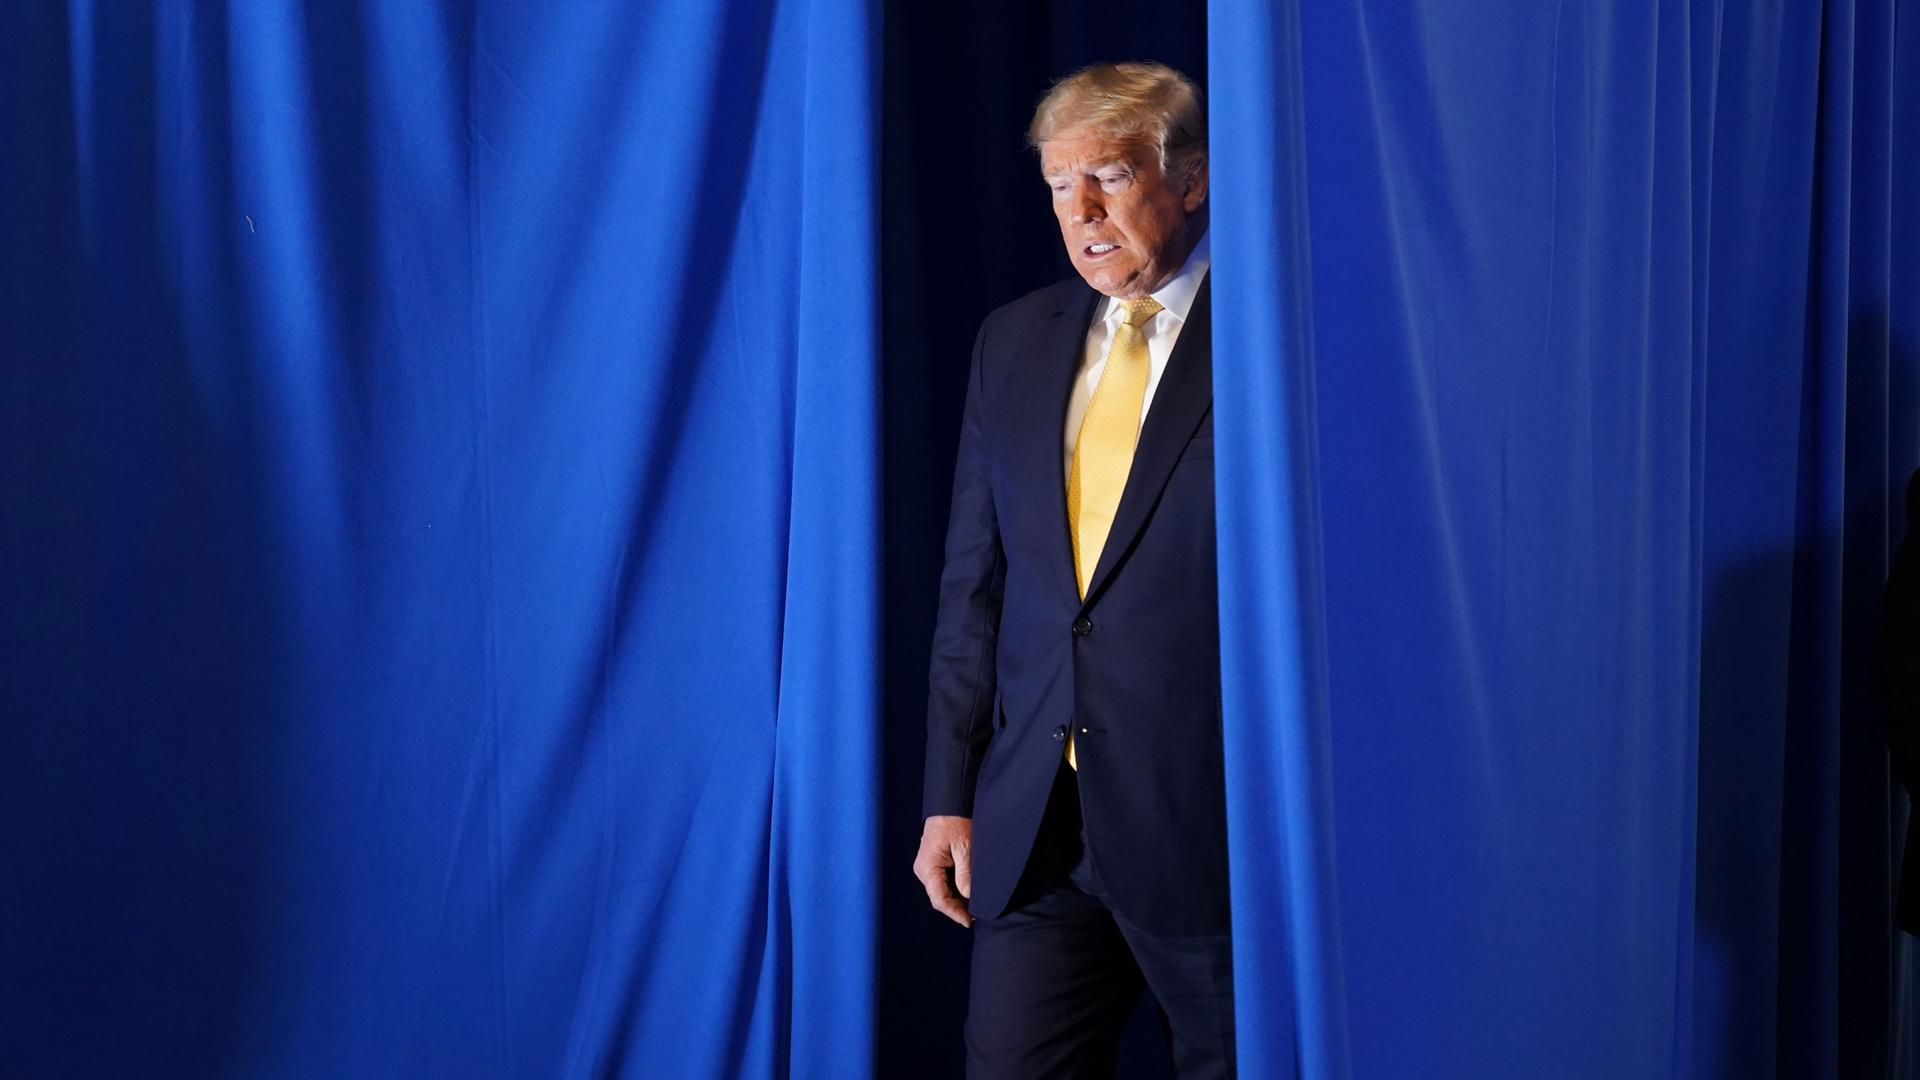 US President Donald Trump is shown walking through a parted blue current and wearing a suit.